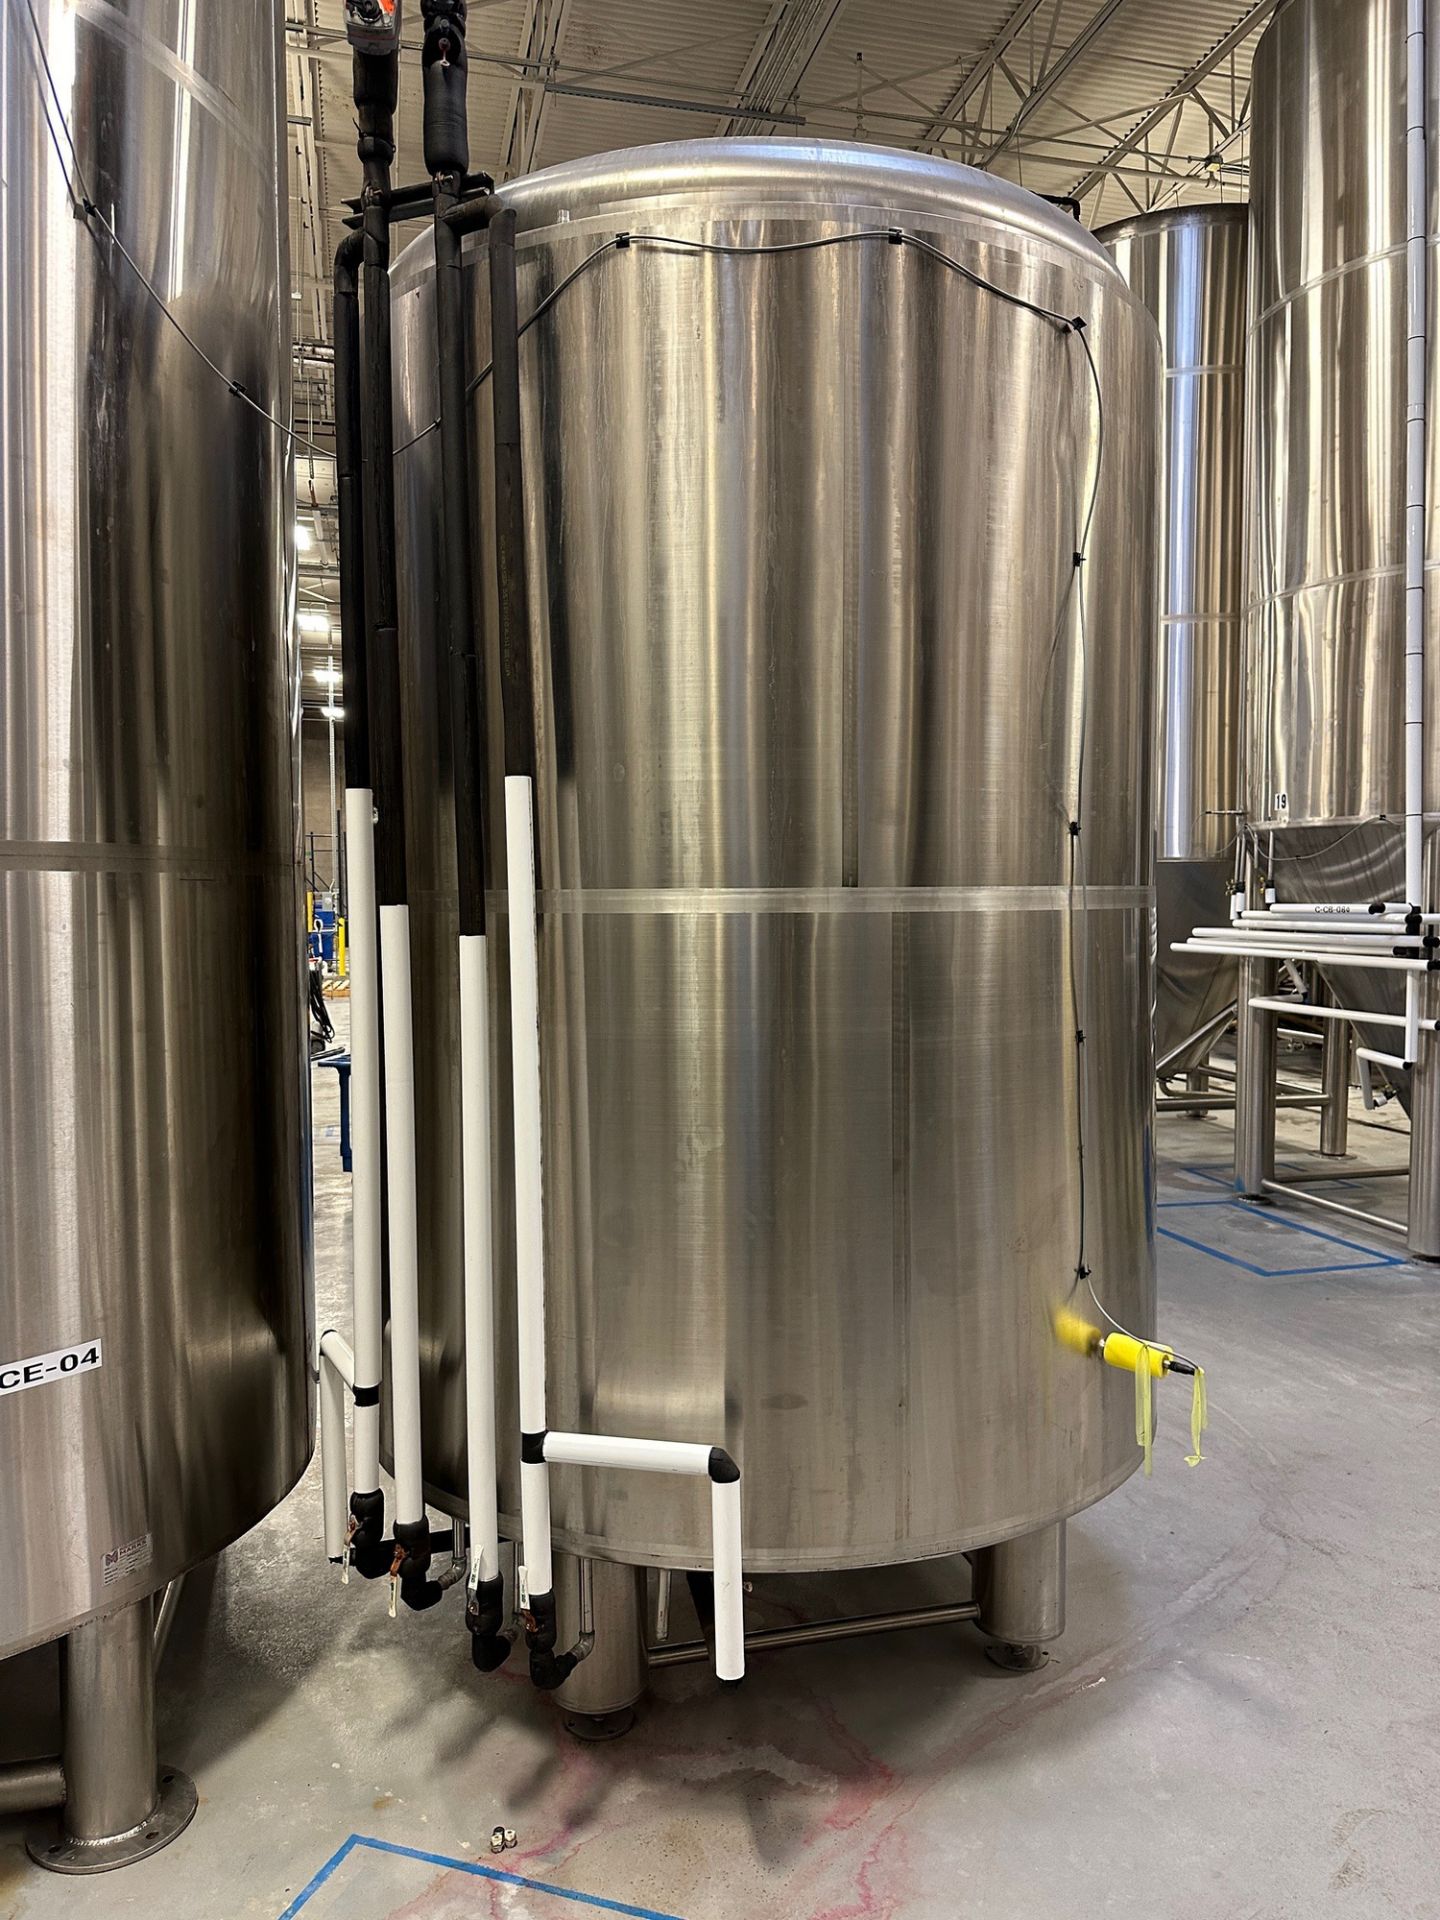 2018 Prospero 60 BBL Stainless Steel Brite Tank (13) - Dish Bottom, Glycol Jacketed | Rig Fee $2230 - Image 4 of 5